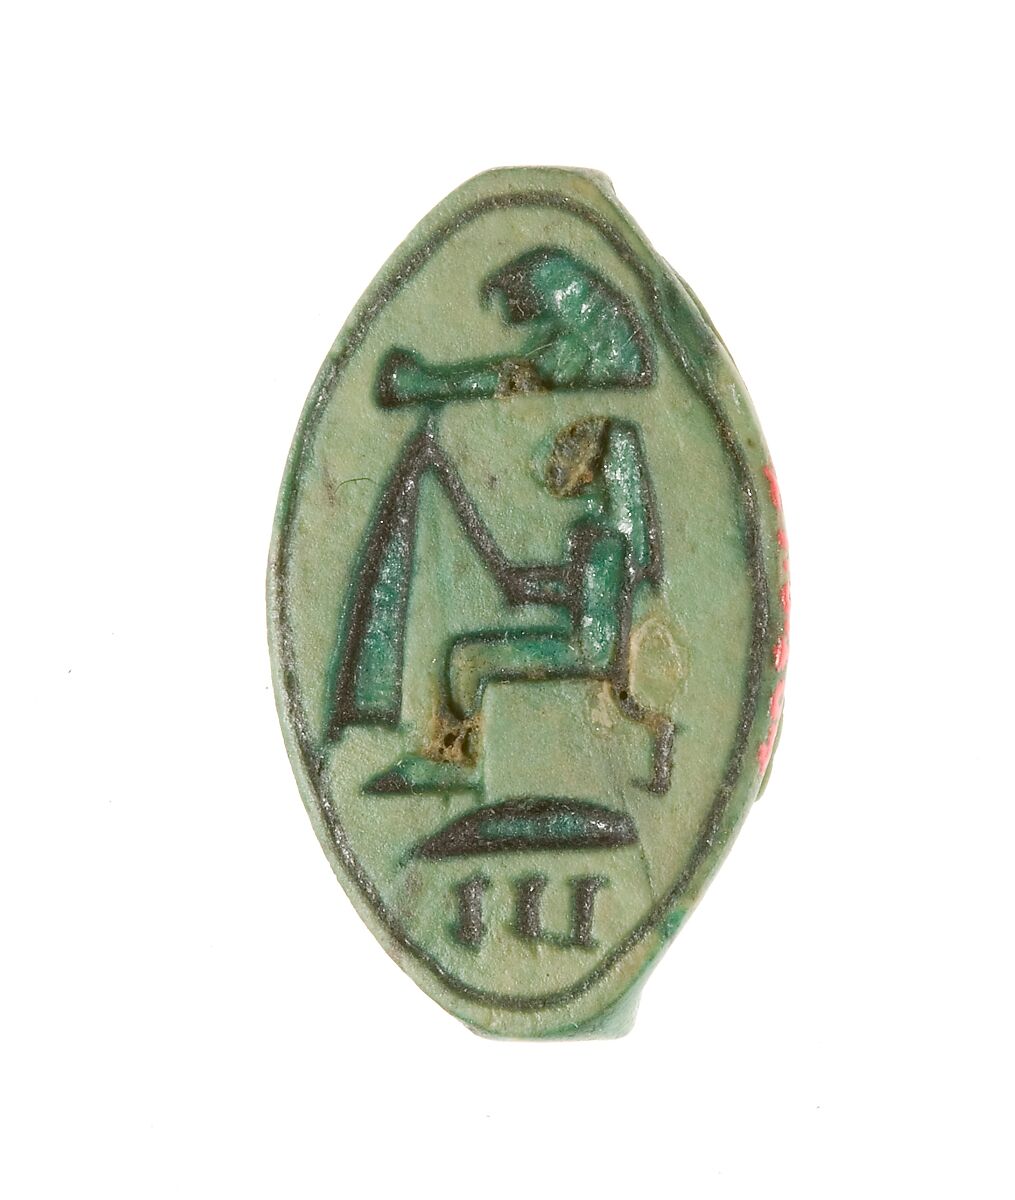 Cowroid Seal Amulet Inscribed with the Name of Hatshepsut, Steatite (glazed) 